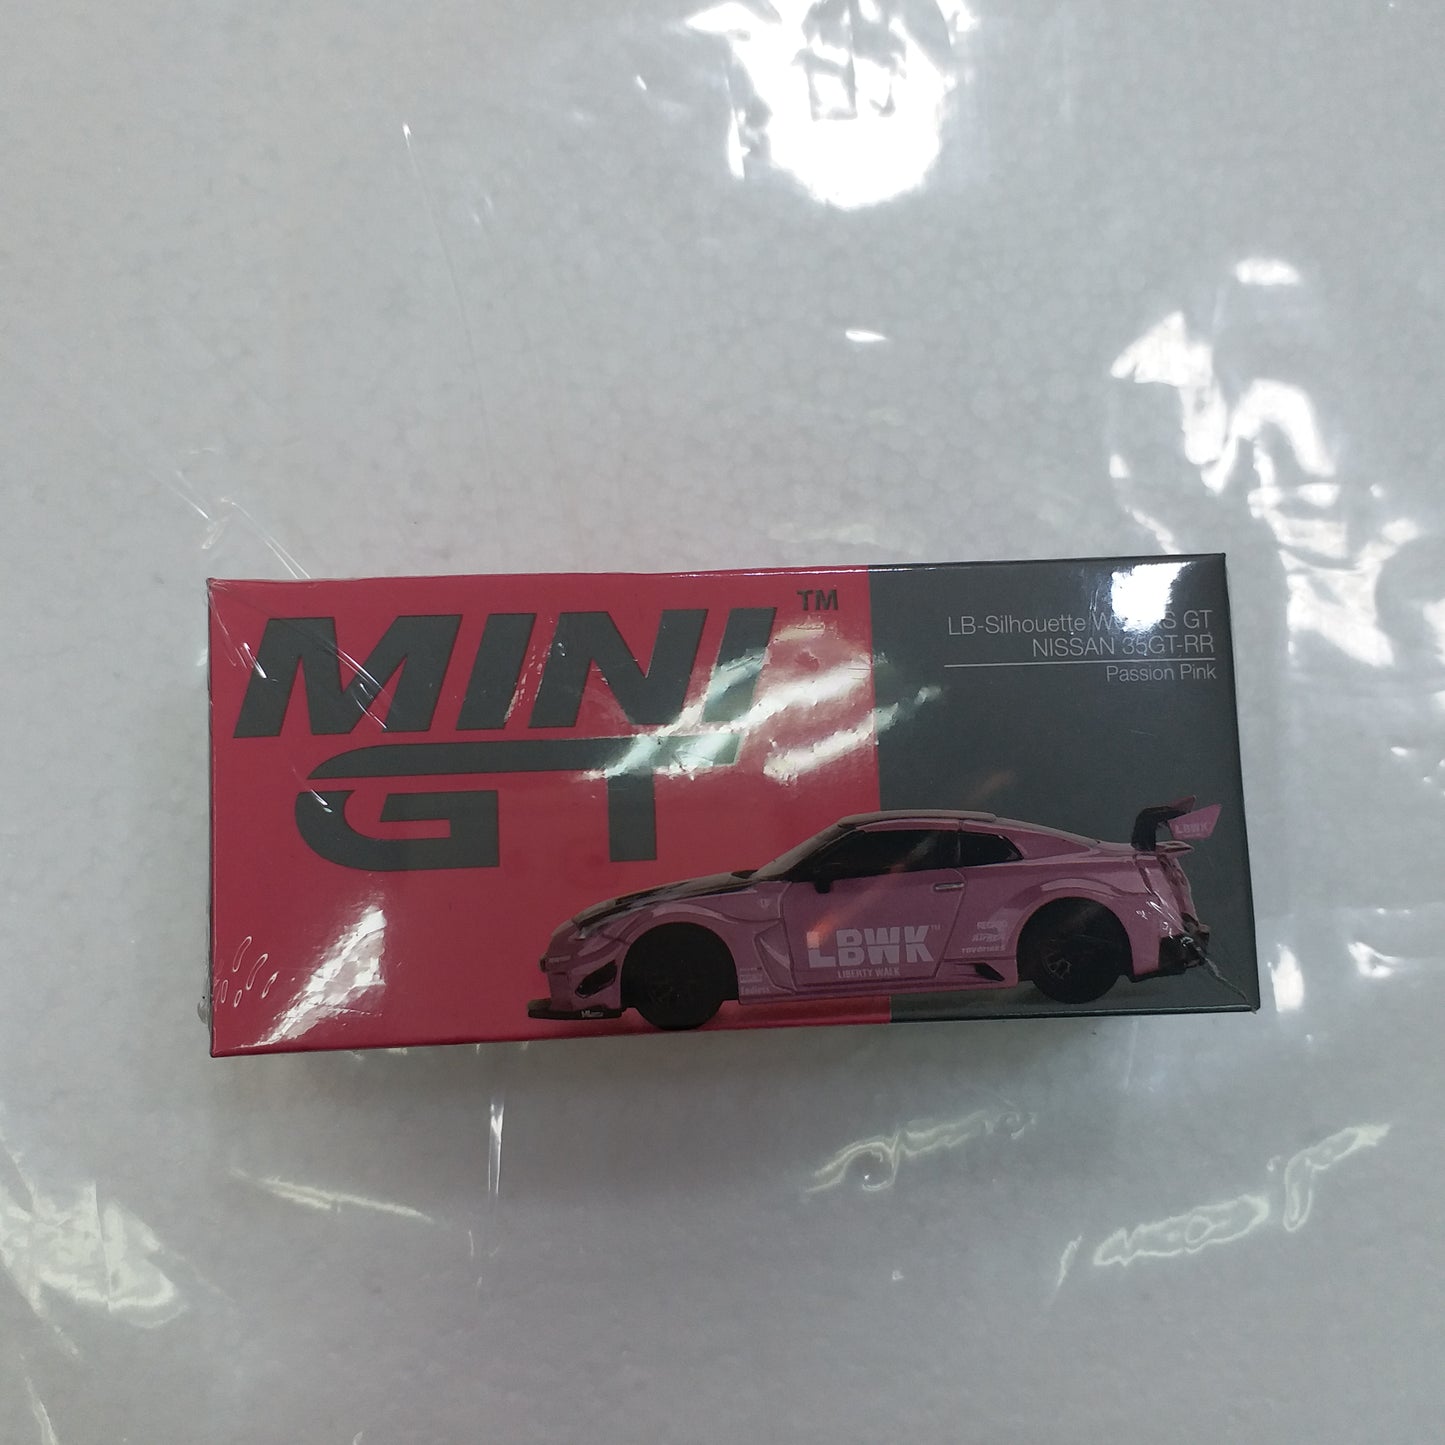 MINI GT #418 Lb-Sihouette WORKS GT Nissan 35GT-RR Passion Pink – Mobile ...